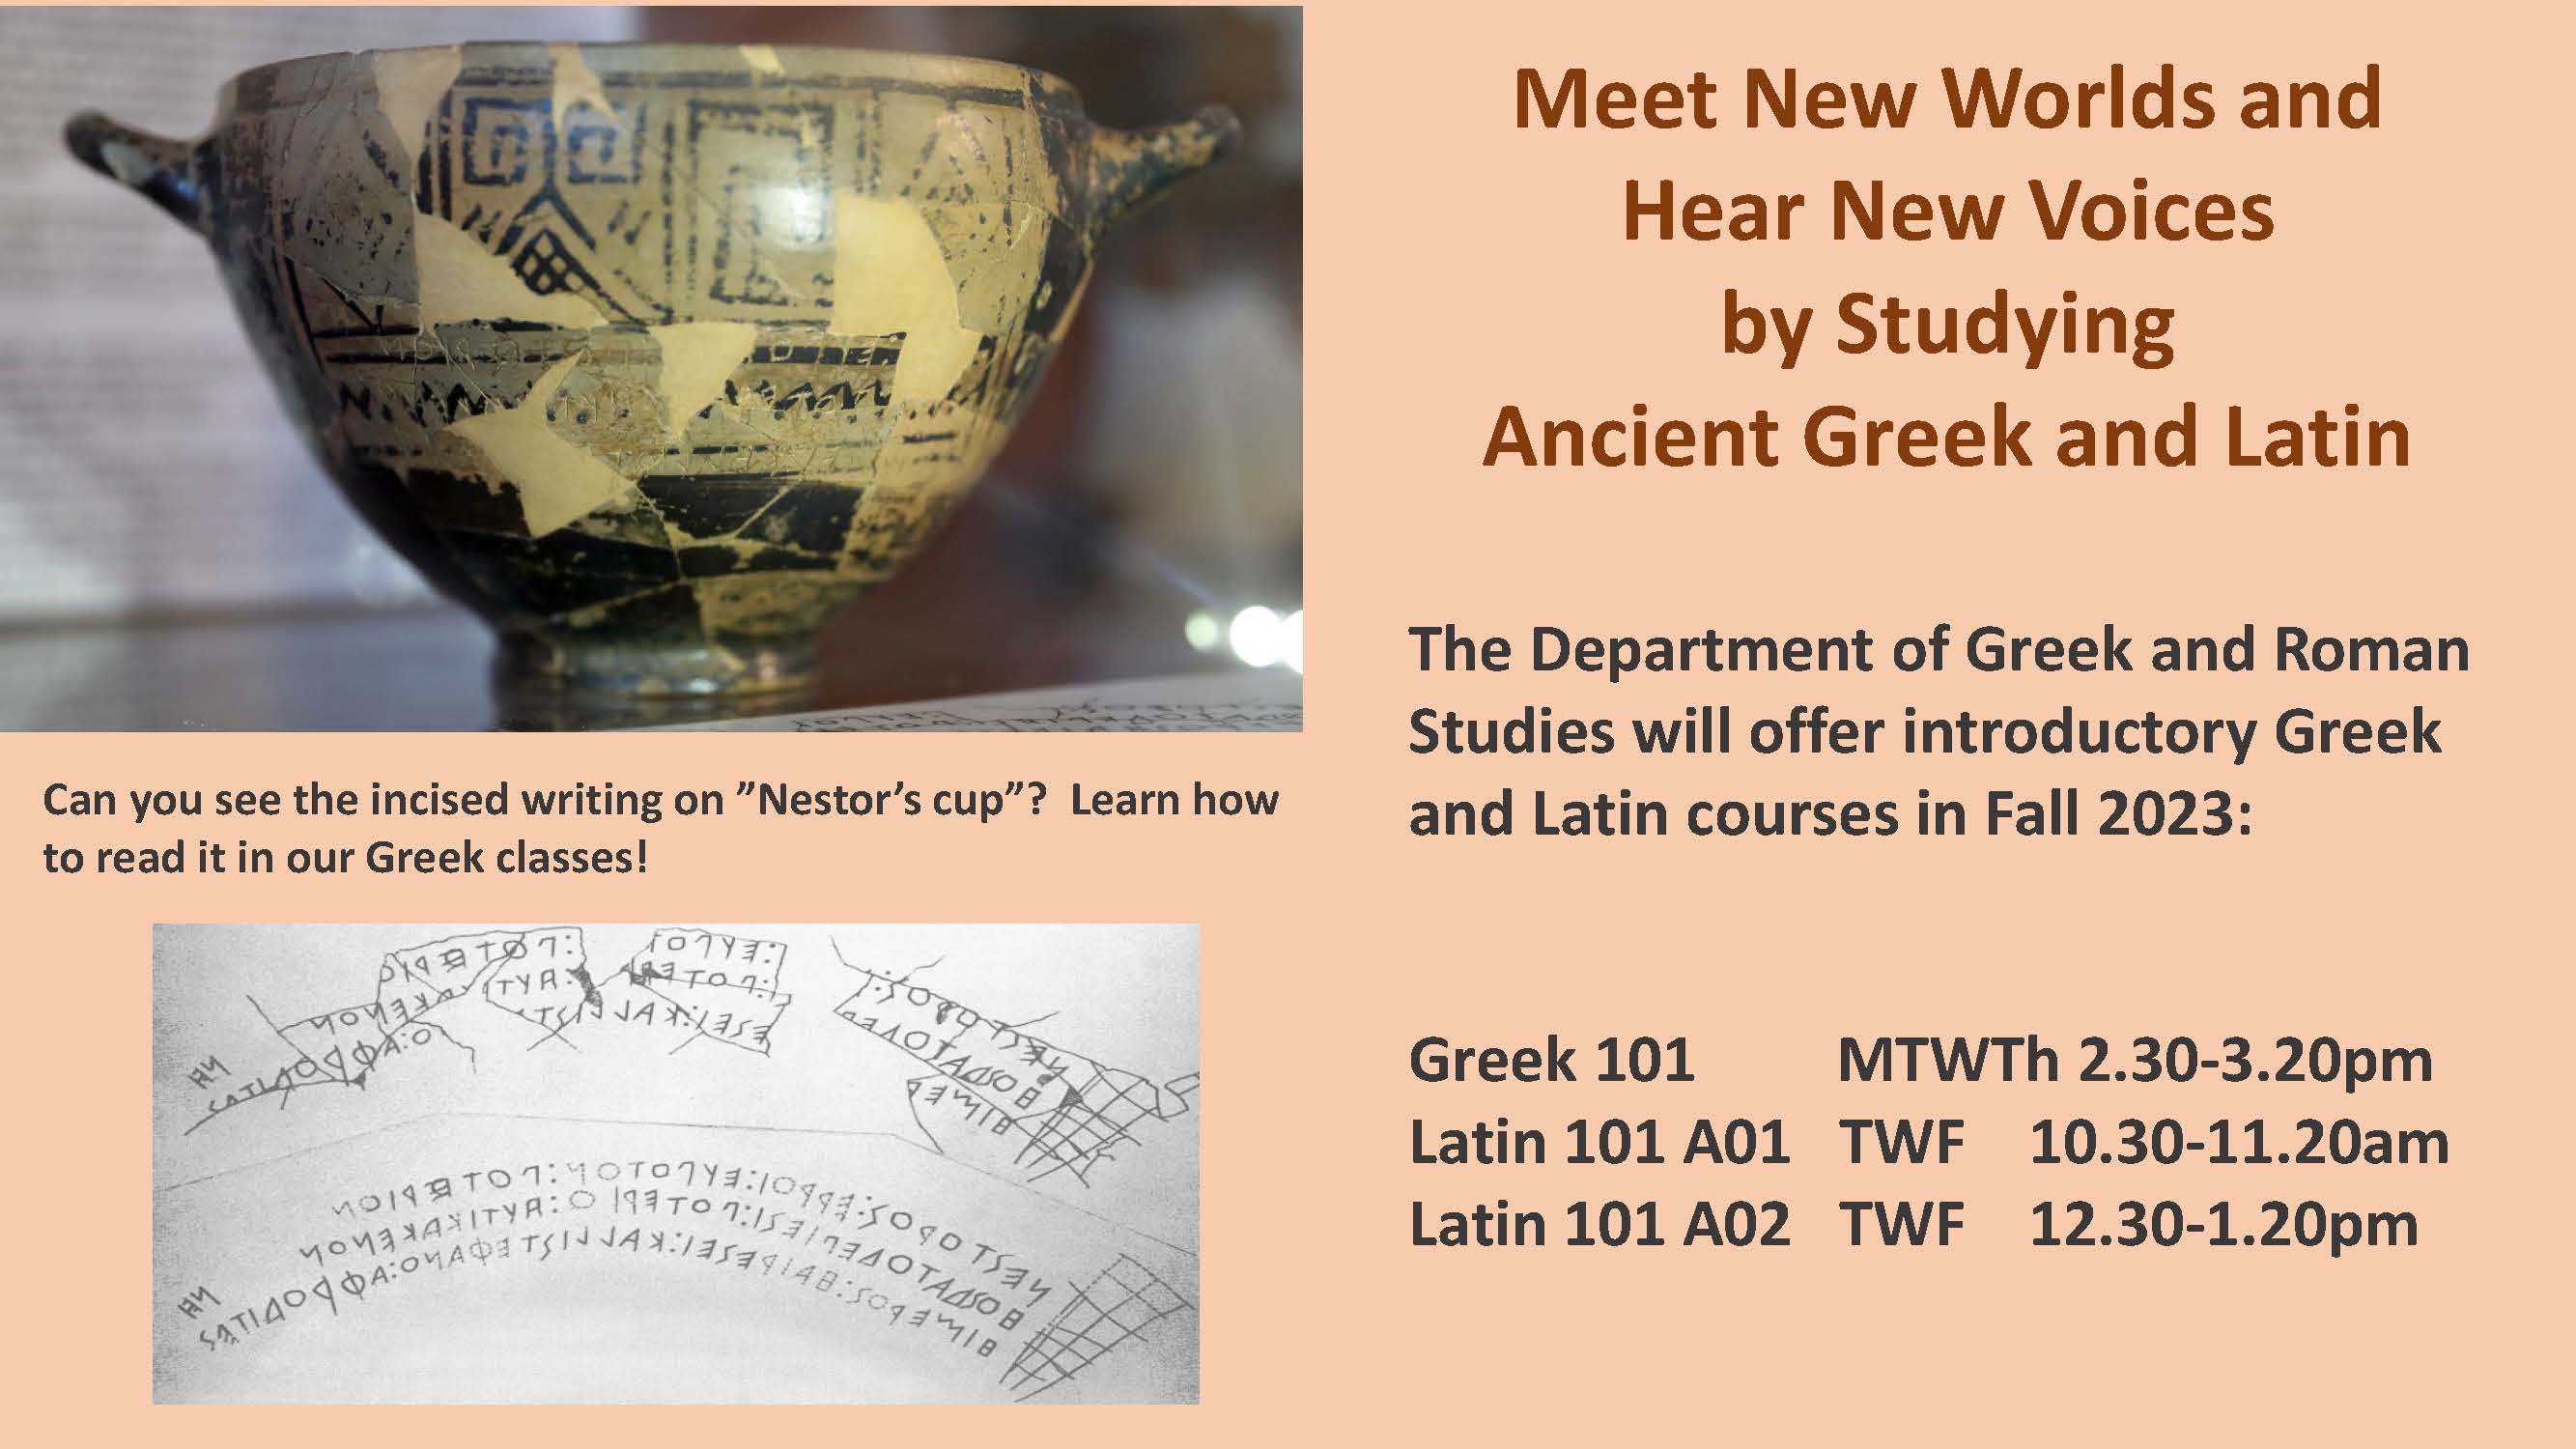 STUDY and LEARN Ancient Greek and Latin